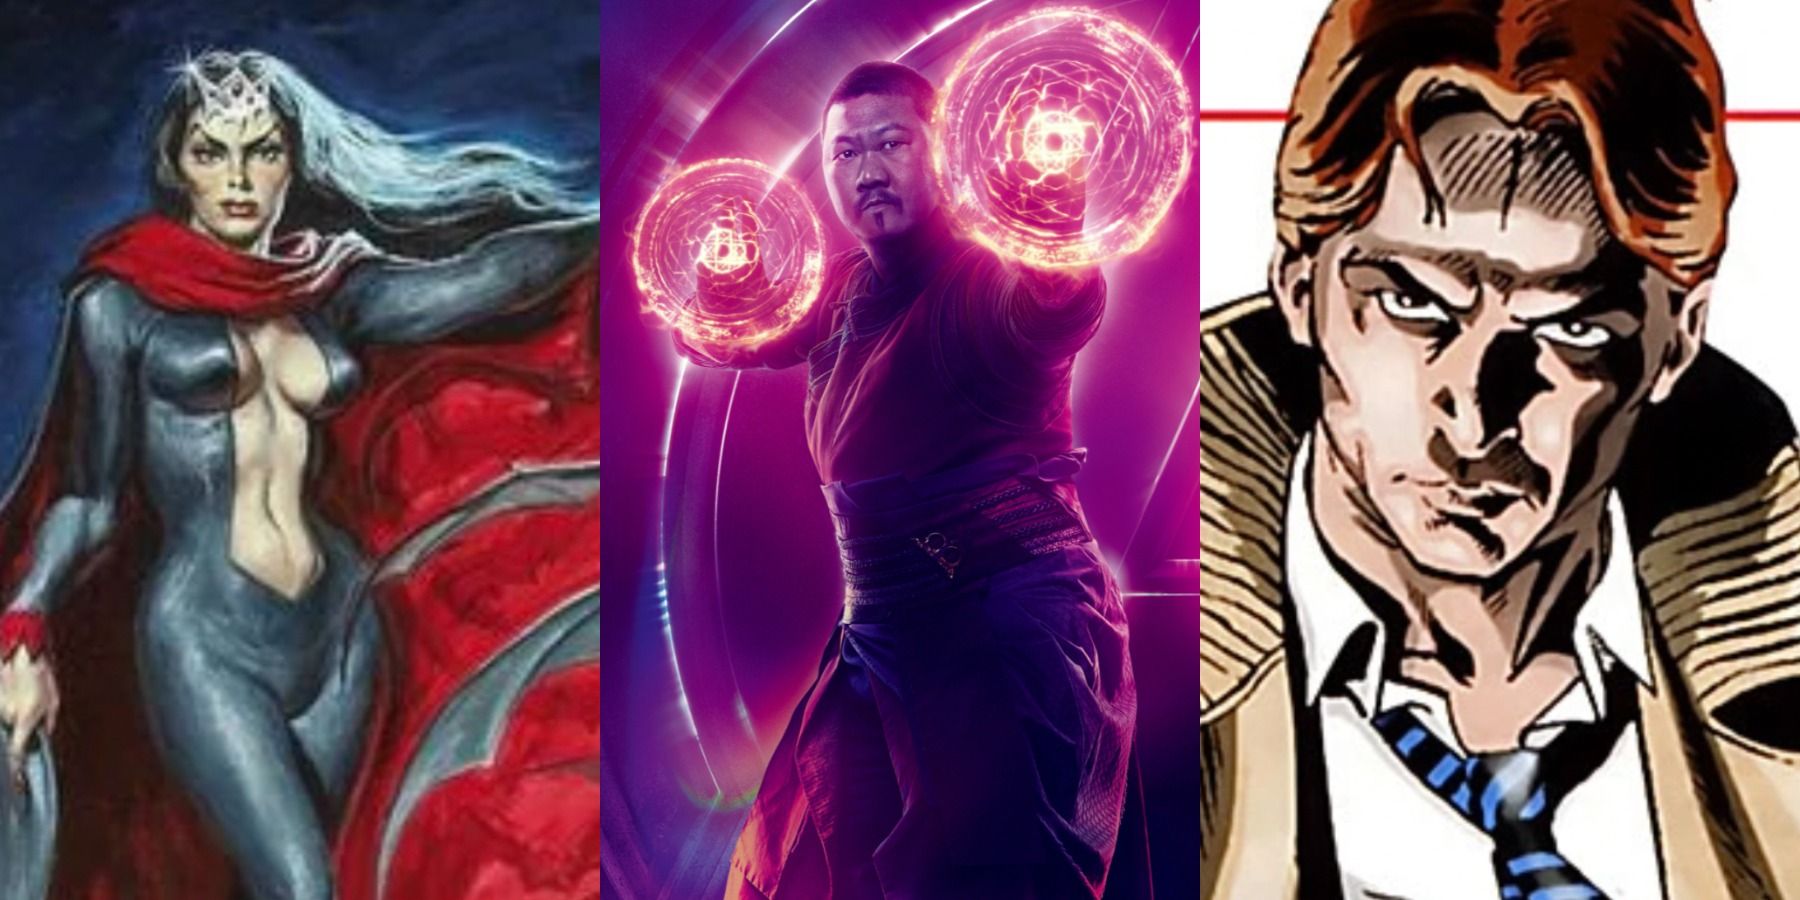 A split image depicts Lilith Drake in Marvel comics, Wong in the MCU, and Hannibal King in Marvel comics